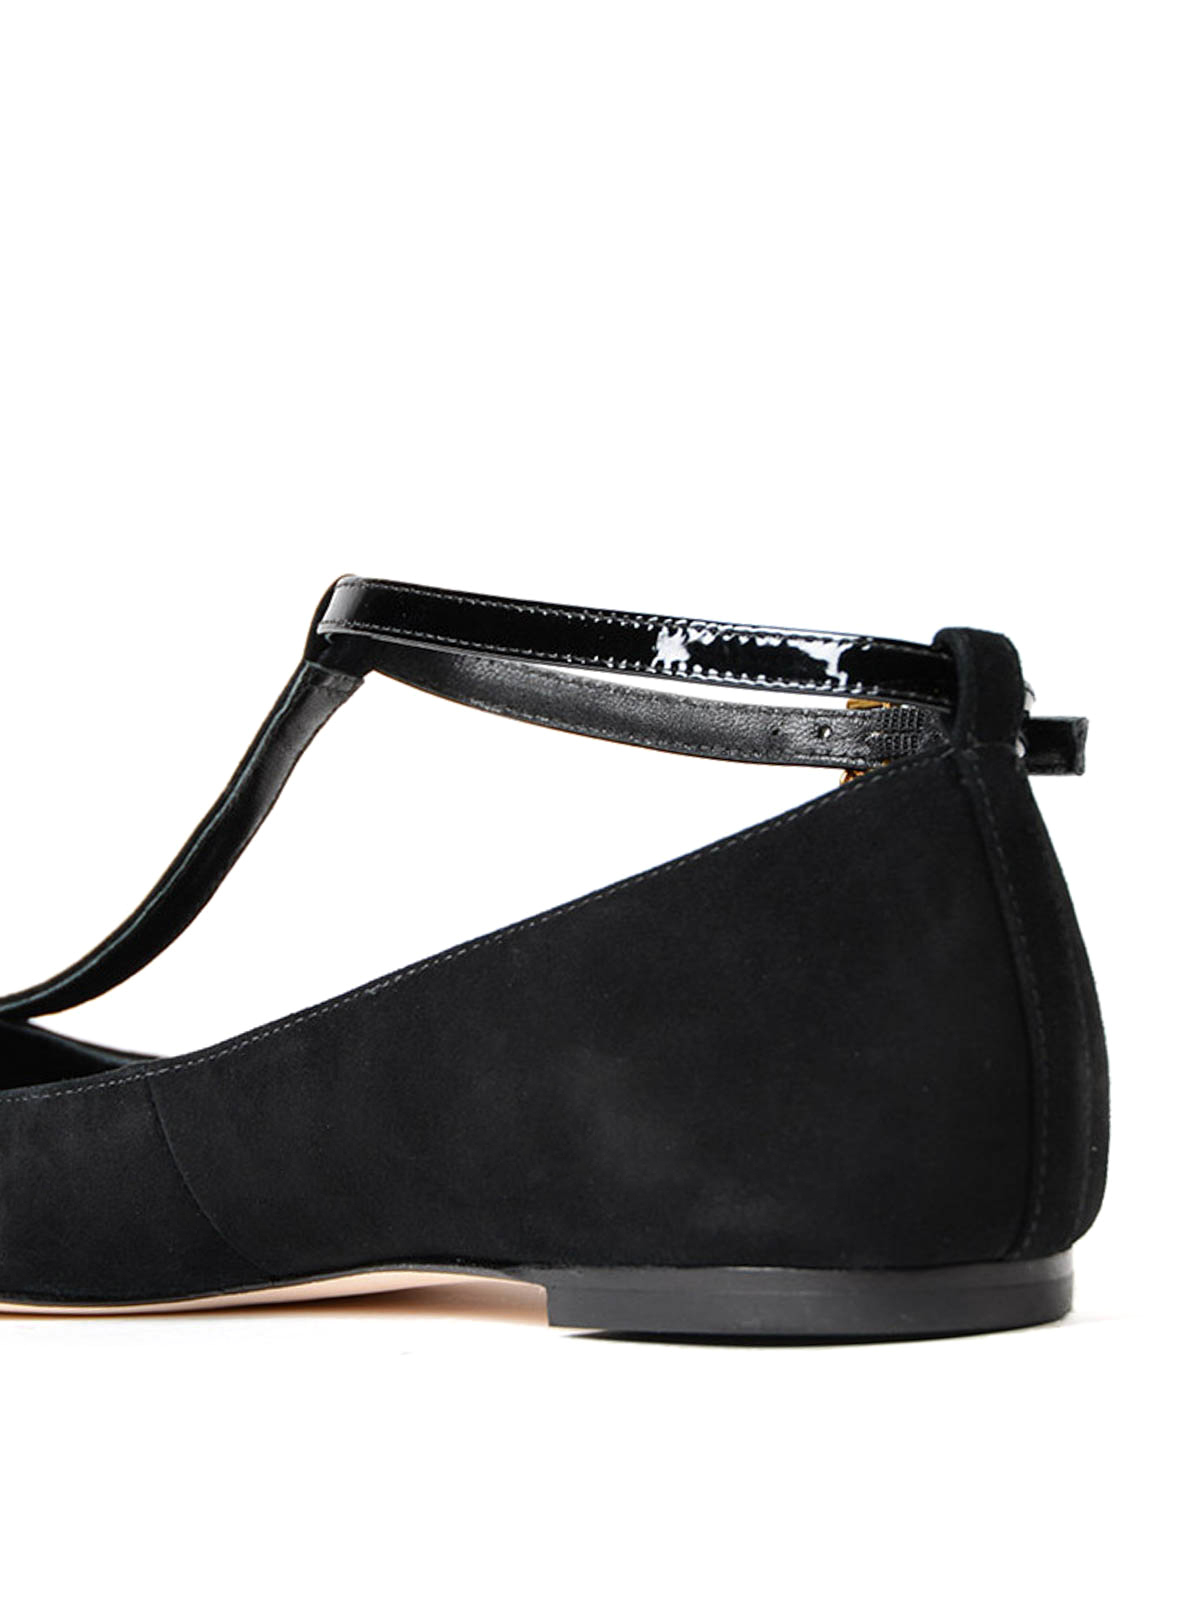 black flat shoes with strap